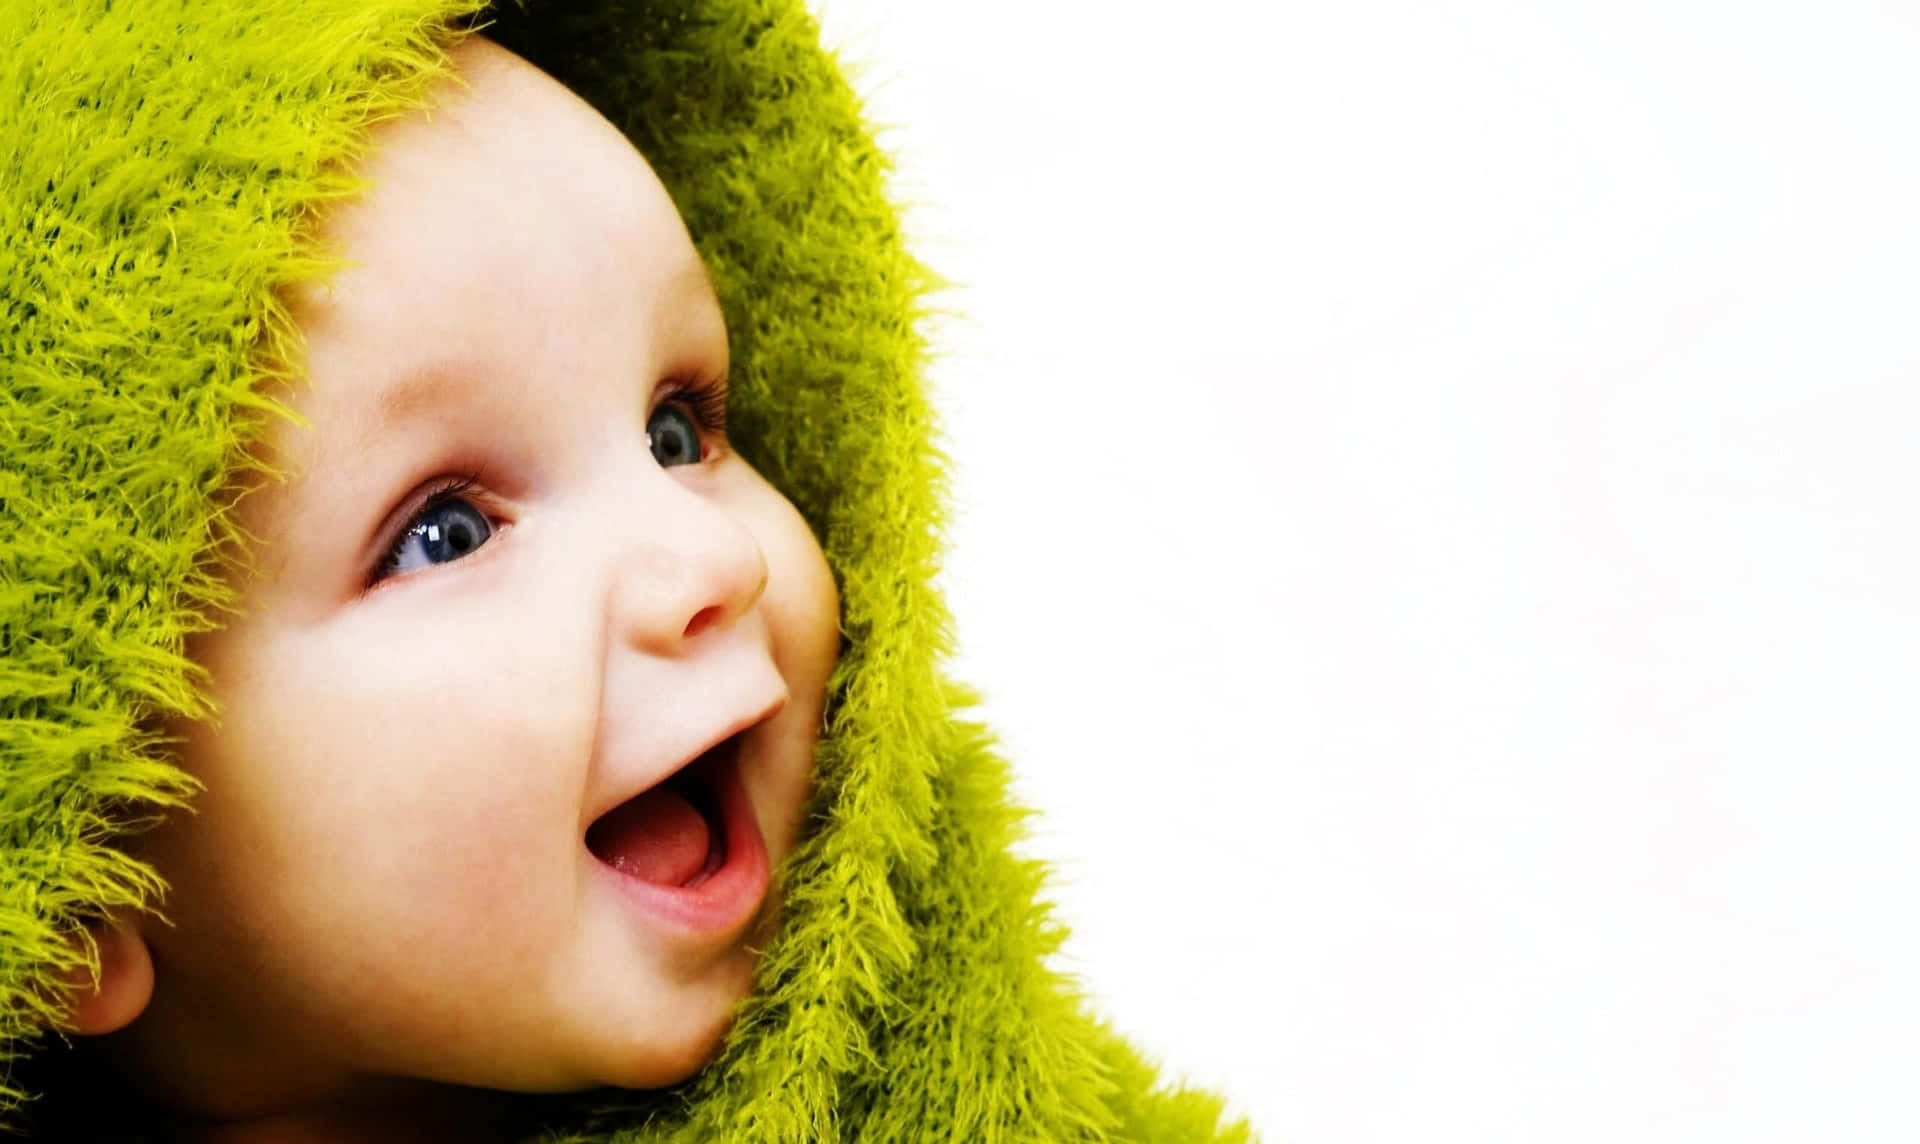 A Baby In A Green Furry Blanket Is Laughing